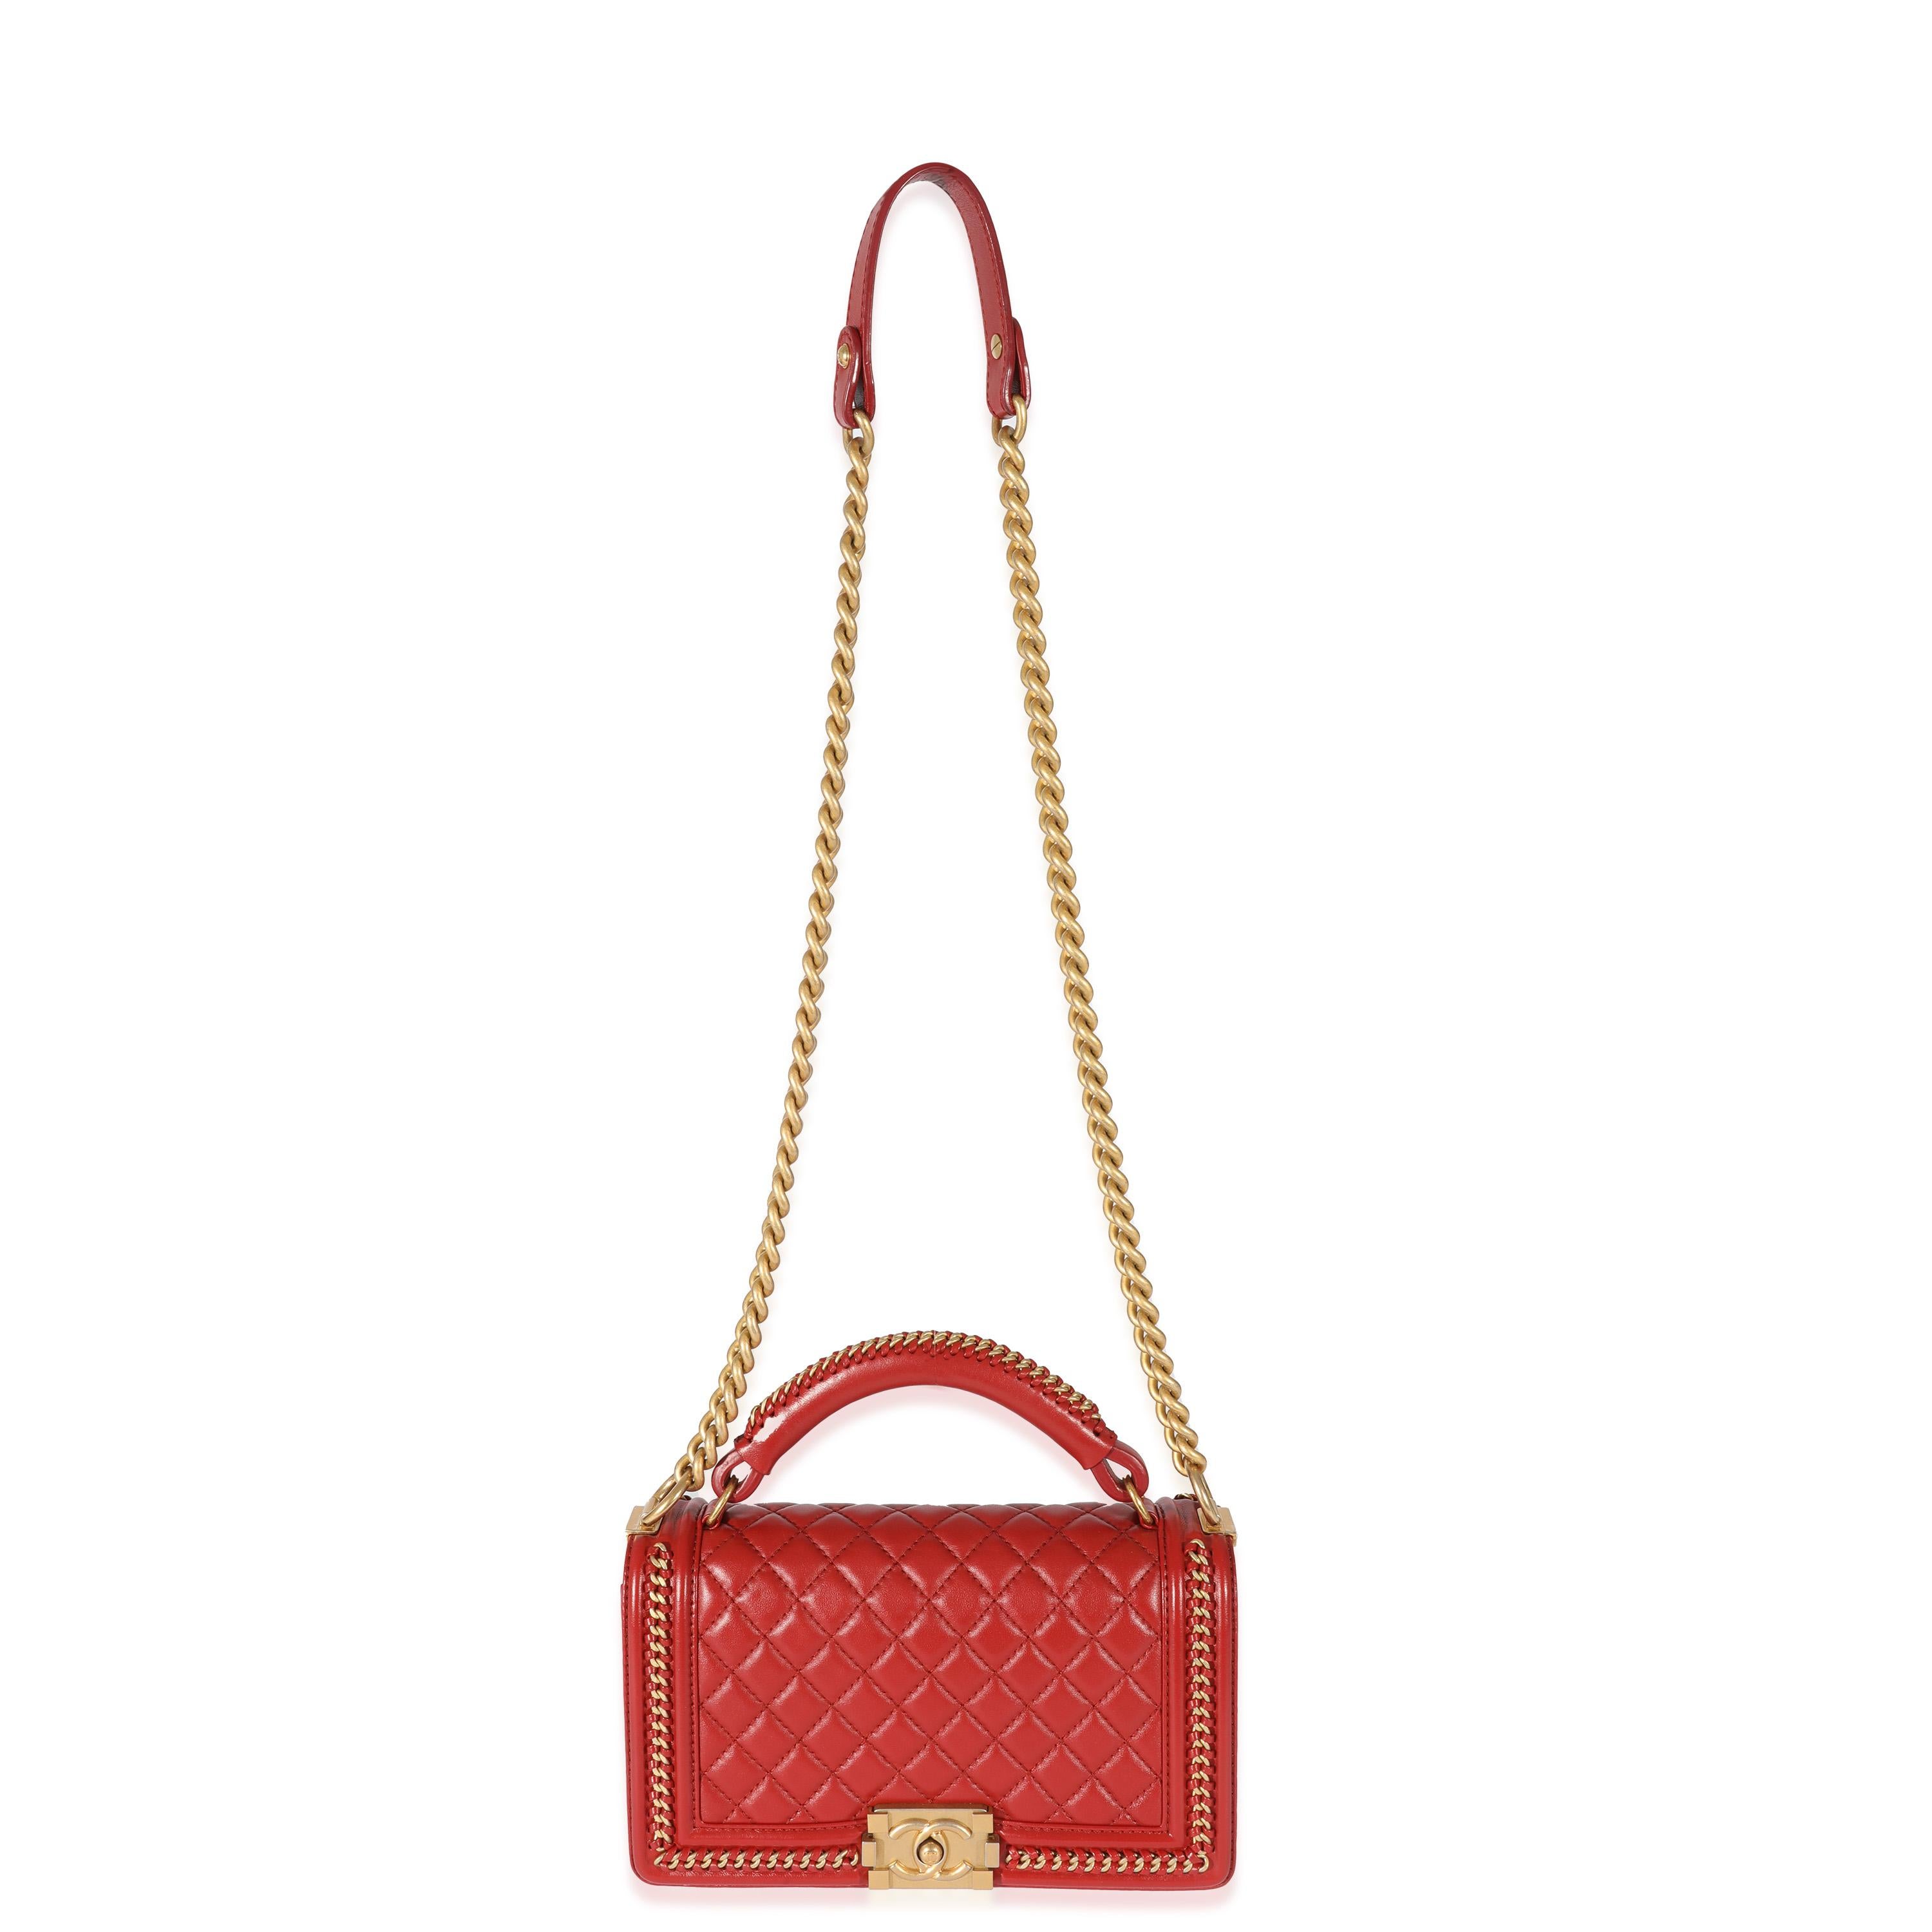 Listing Title: Chanel Red Lambskin Chain Around Medium Boy Bag
SKU: 129952
Condition: Pre-owned 
Handbag Condition: Very Good
Condition Comments: Very Good Condition. Faint scuffing to corners. Scratching and tarnishing to hardware.
Brand: